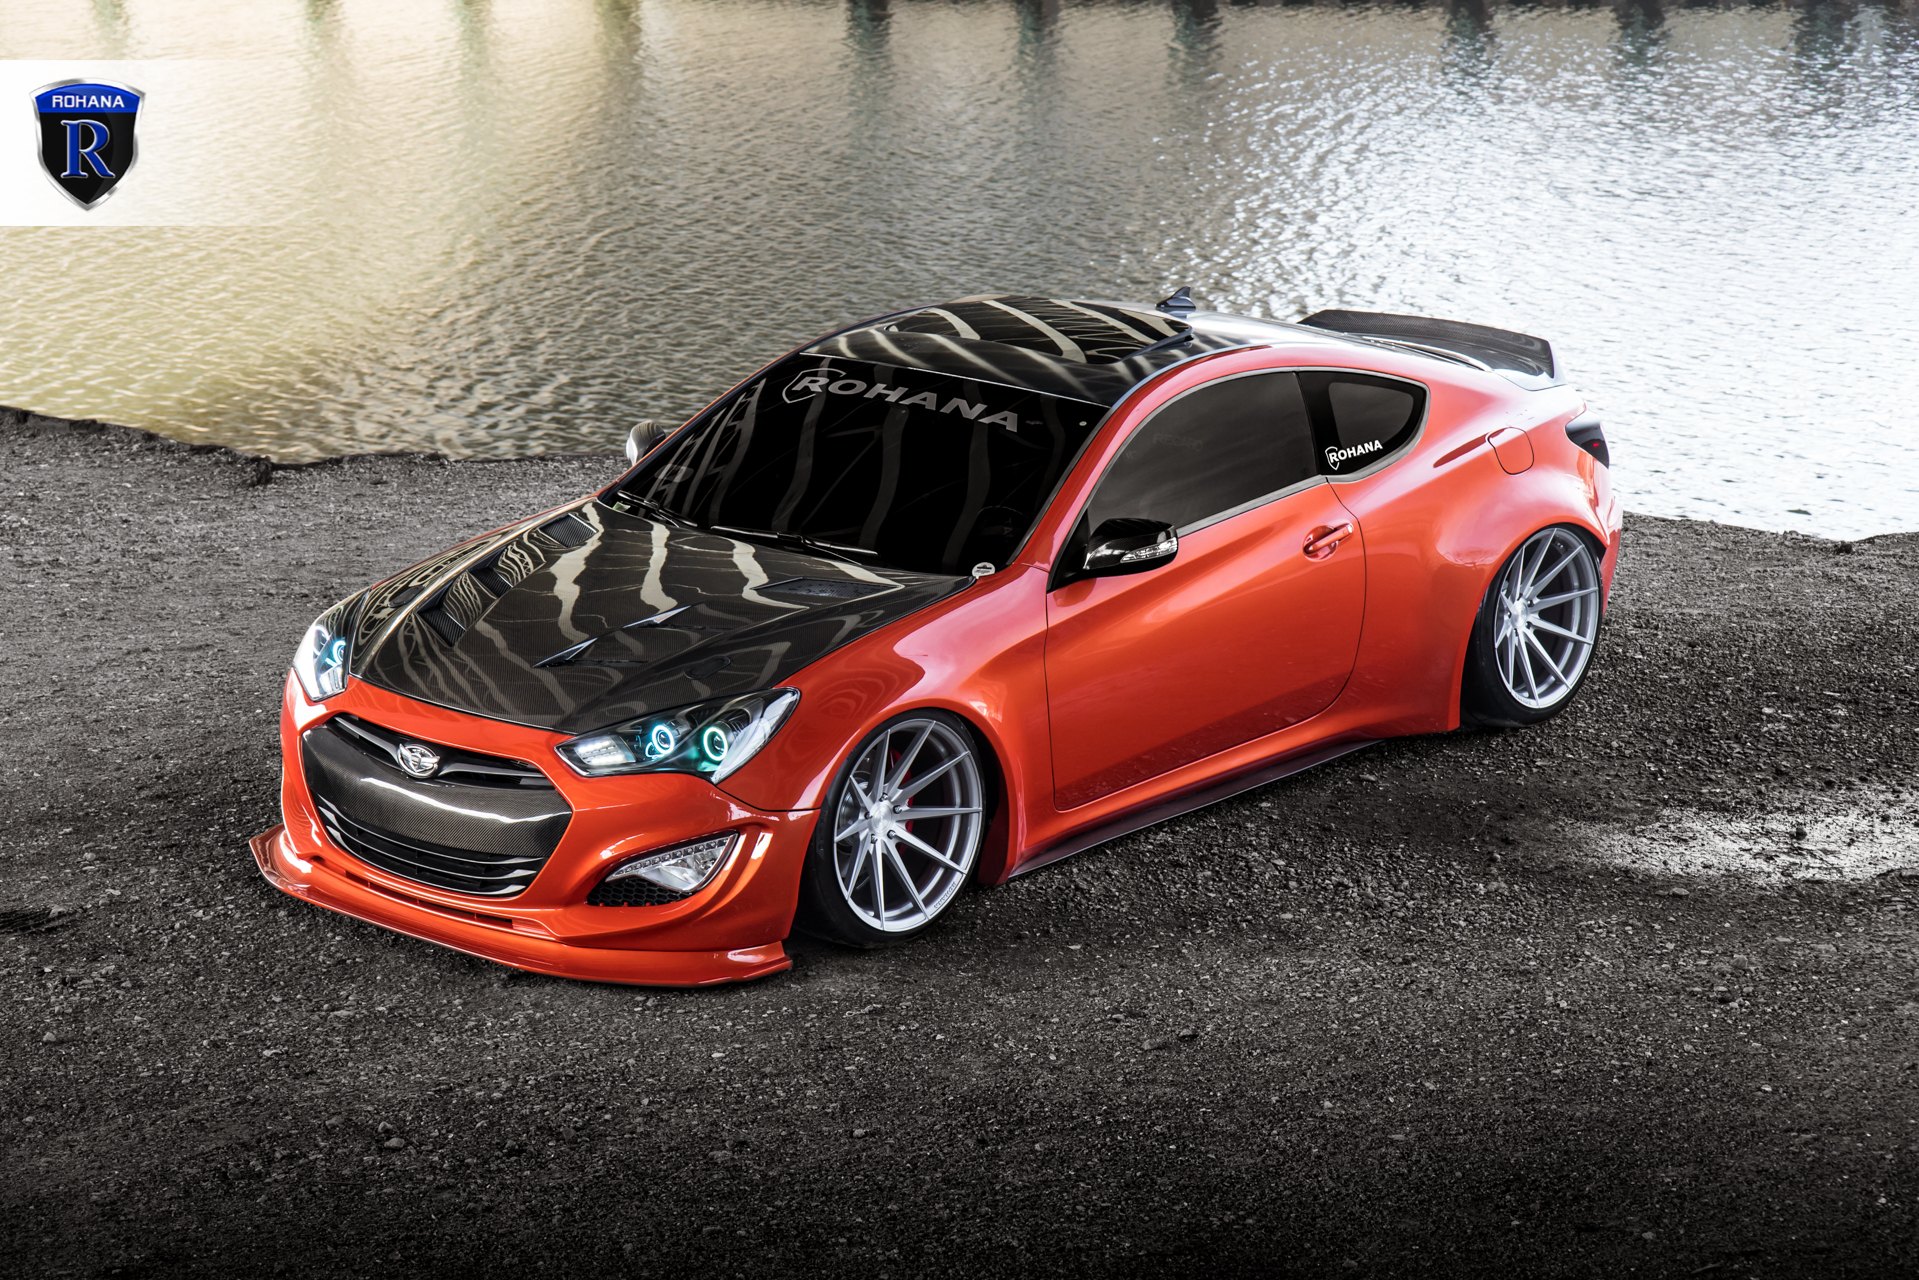 Stylish Exotic Red Hyundai Genesis Coupe Gets Carbon Fiber